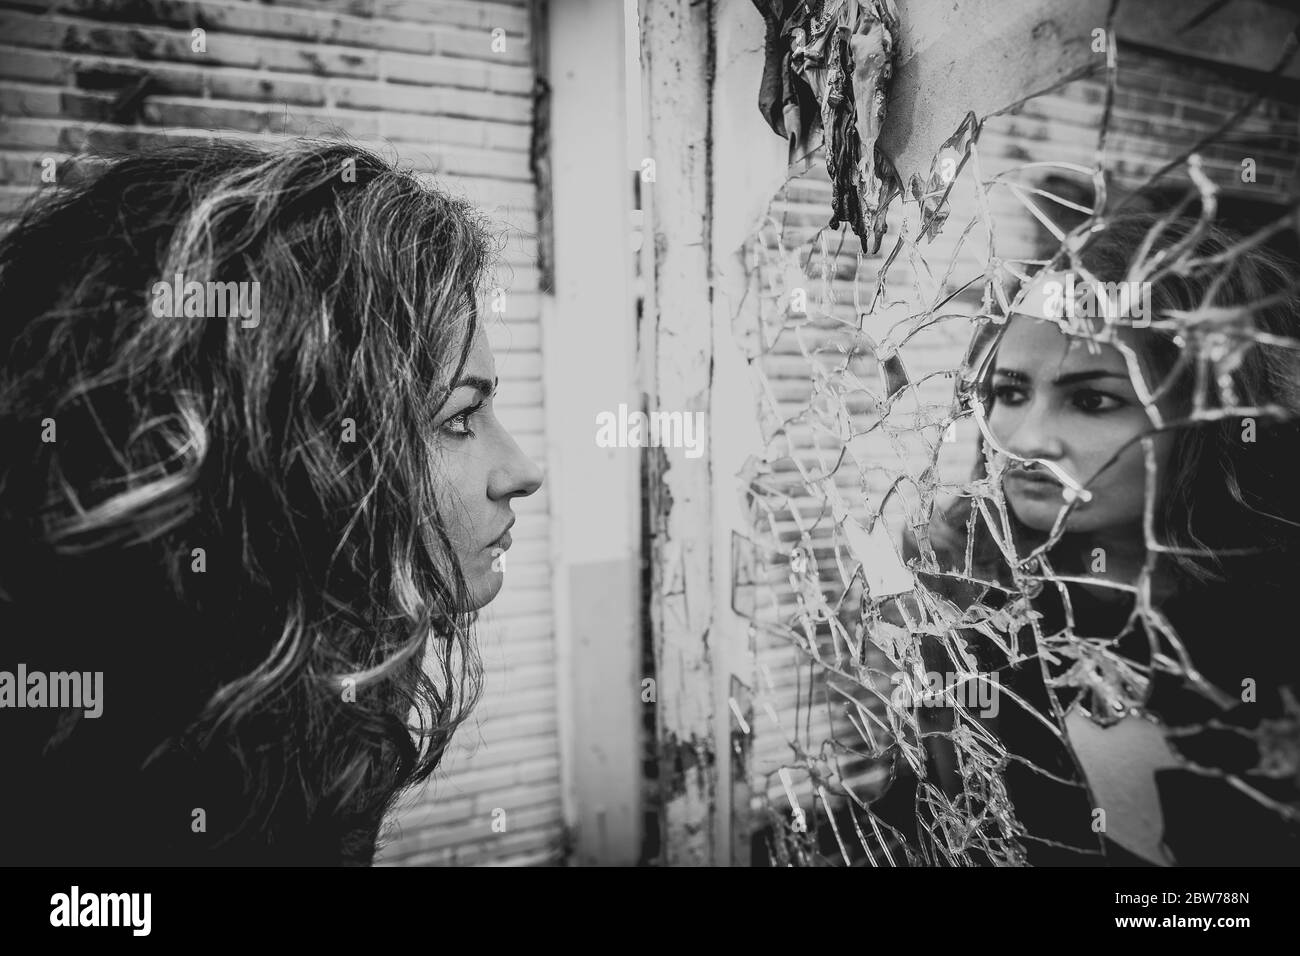 A woman in front of a broken mirror Stock Photo